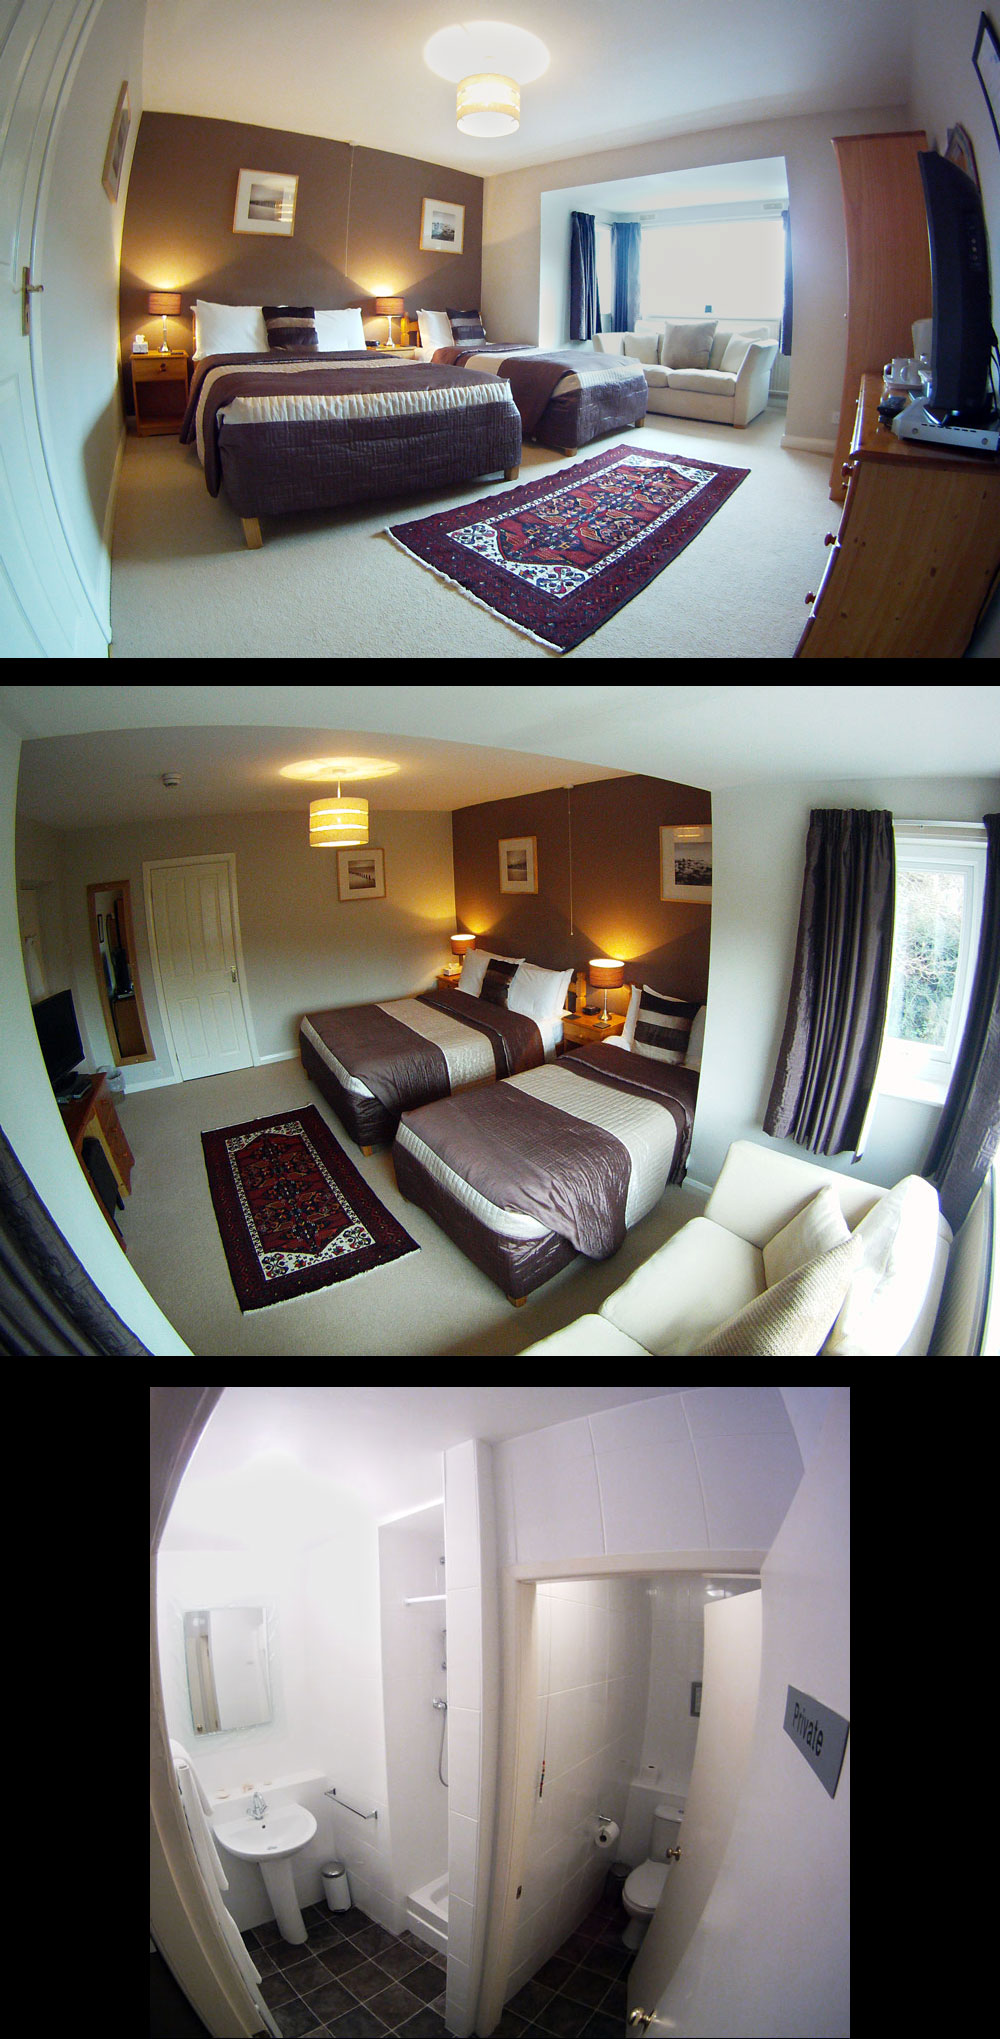 Room 6, Crib Yr Ddysgl, family room, sleeps 3 with double bed and single bed, private bathroom